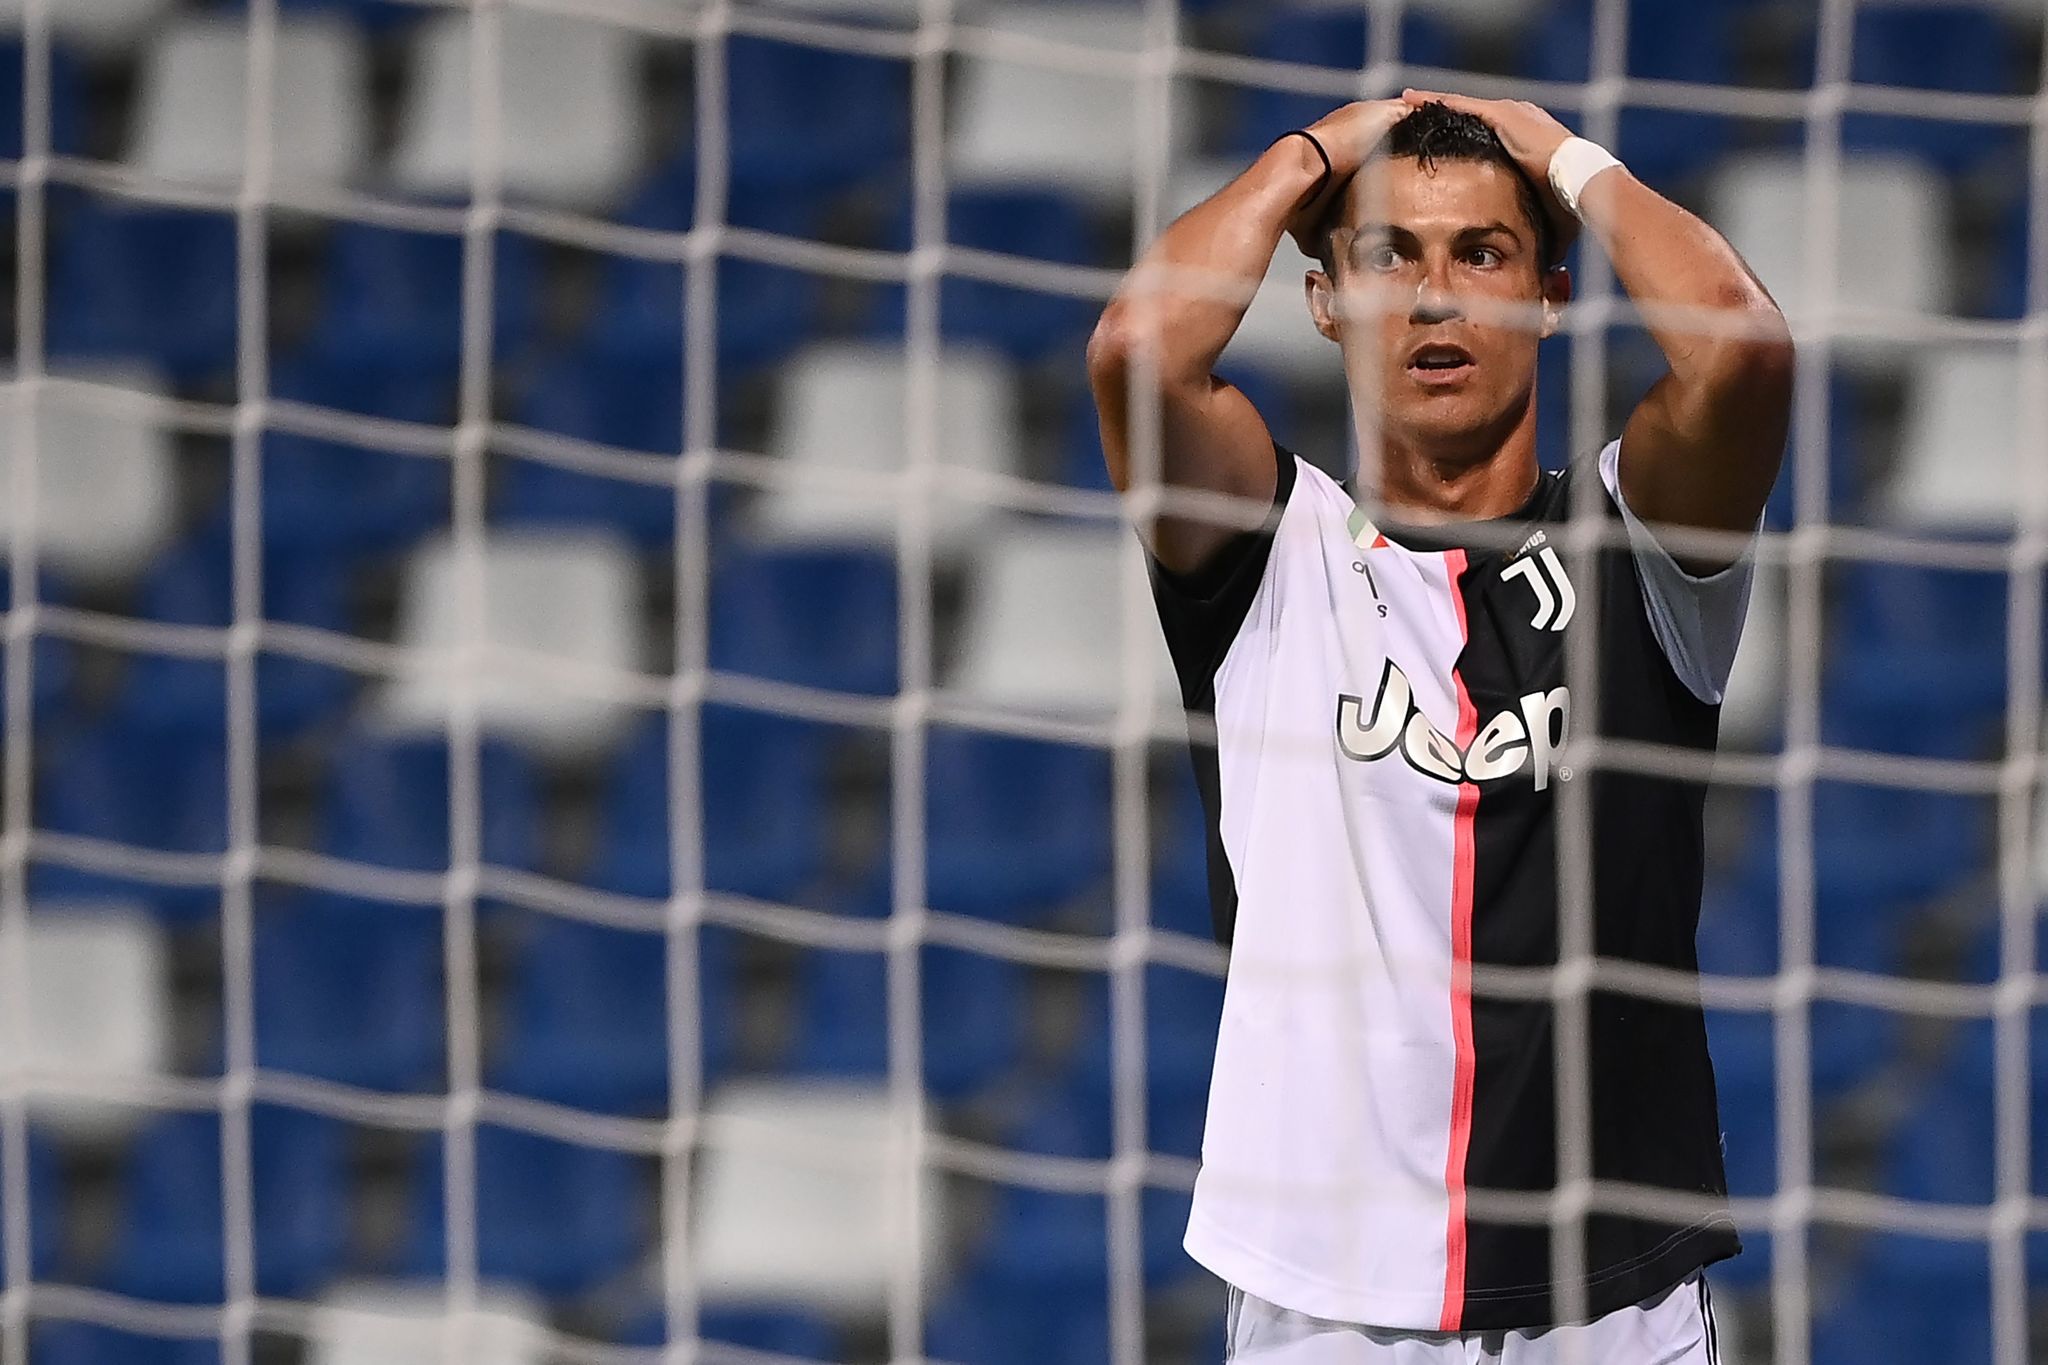 Juventus Portuguese forward lt;HIT gt;Cristiano lt;/HIT gt; Ronaldo reacts after missing a goal opportunity during the Italian Serie A football match between Sassuolo and Juventus Turin played behind closed doors on July 15, 2020 at the Mapei stadium in Reggio Emilia. (Photo by MARCO BERTORELLO / AFP)